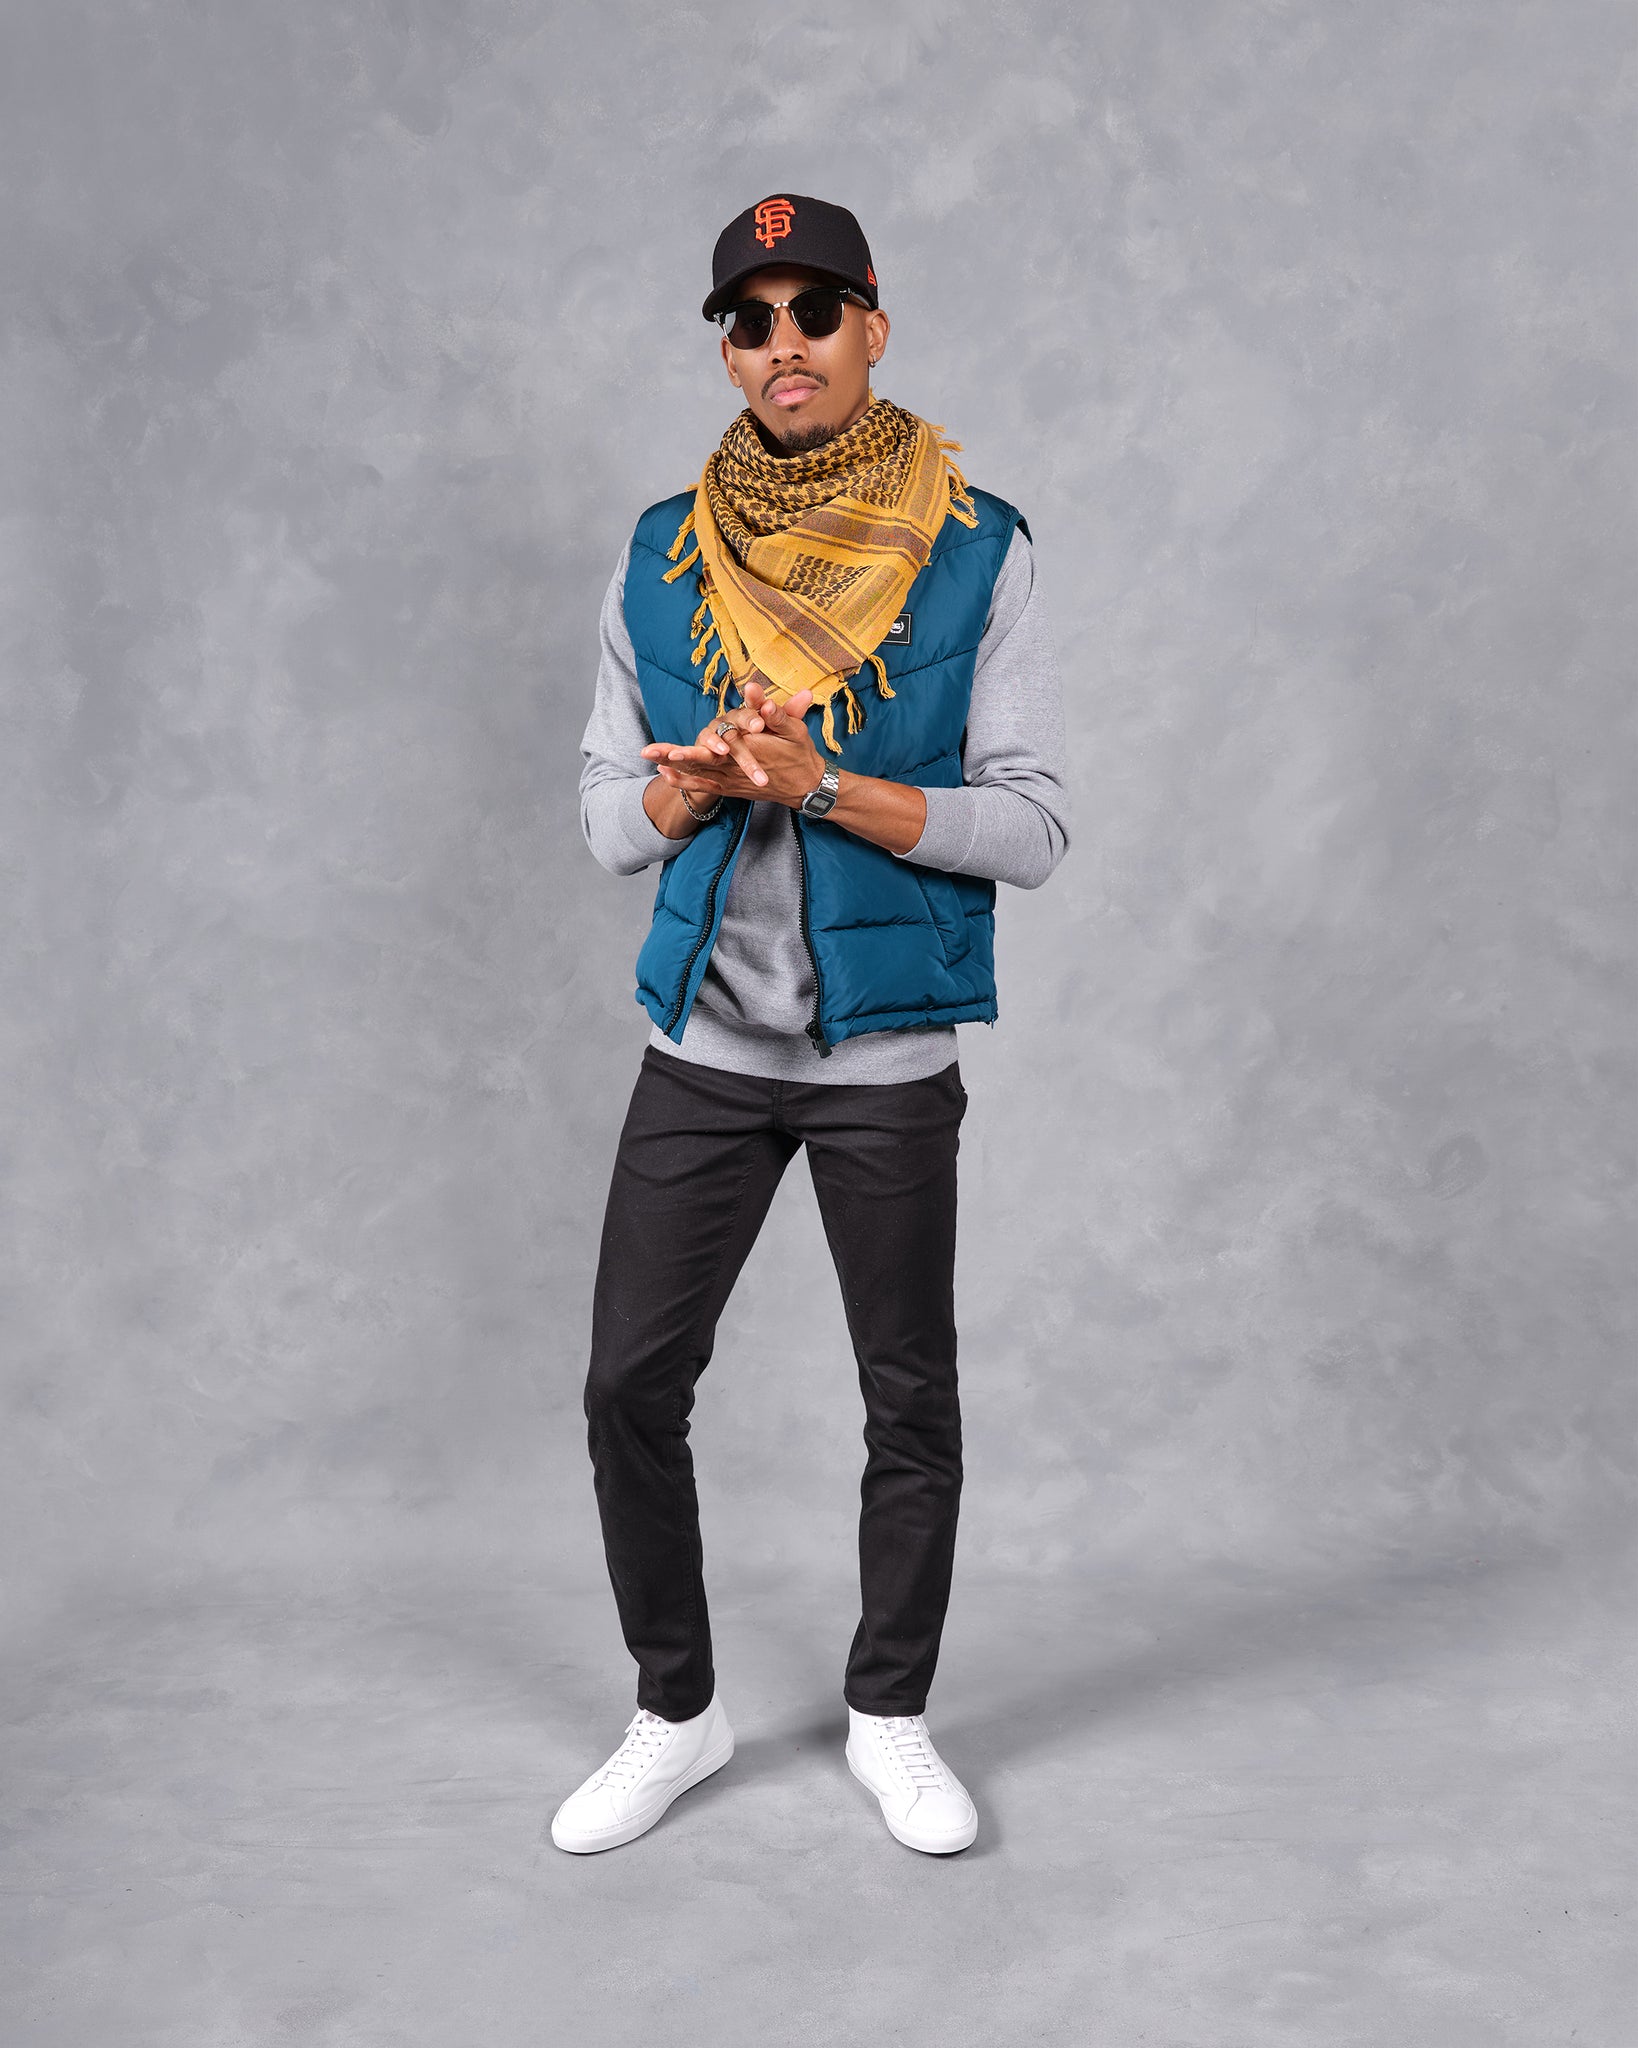 Southern Gents Puffer Vest - Teal